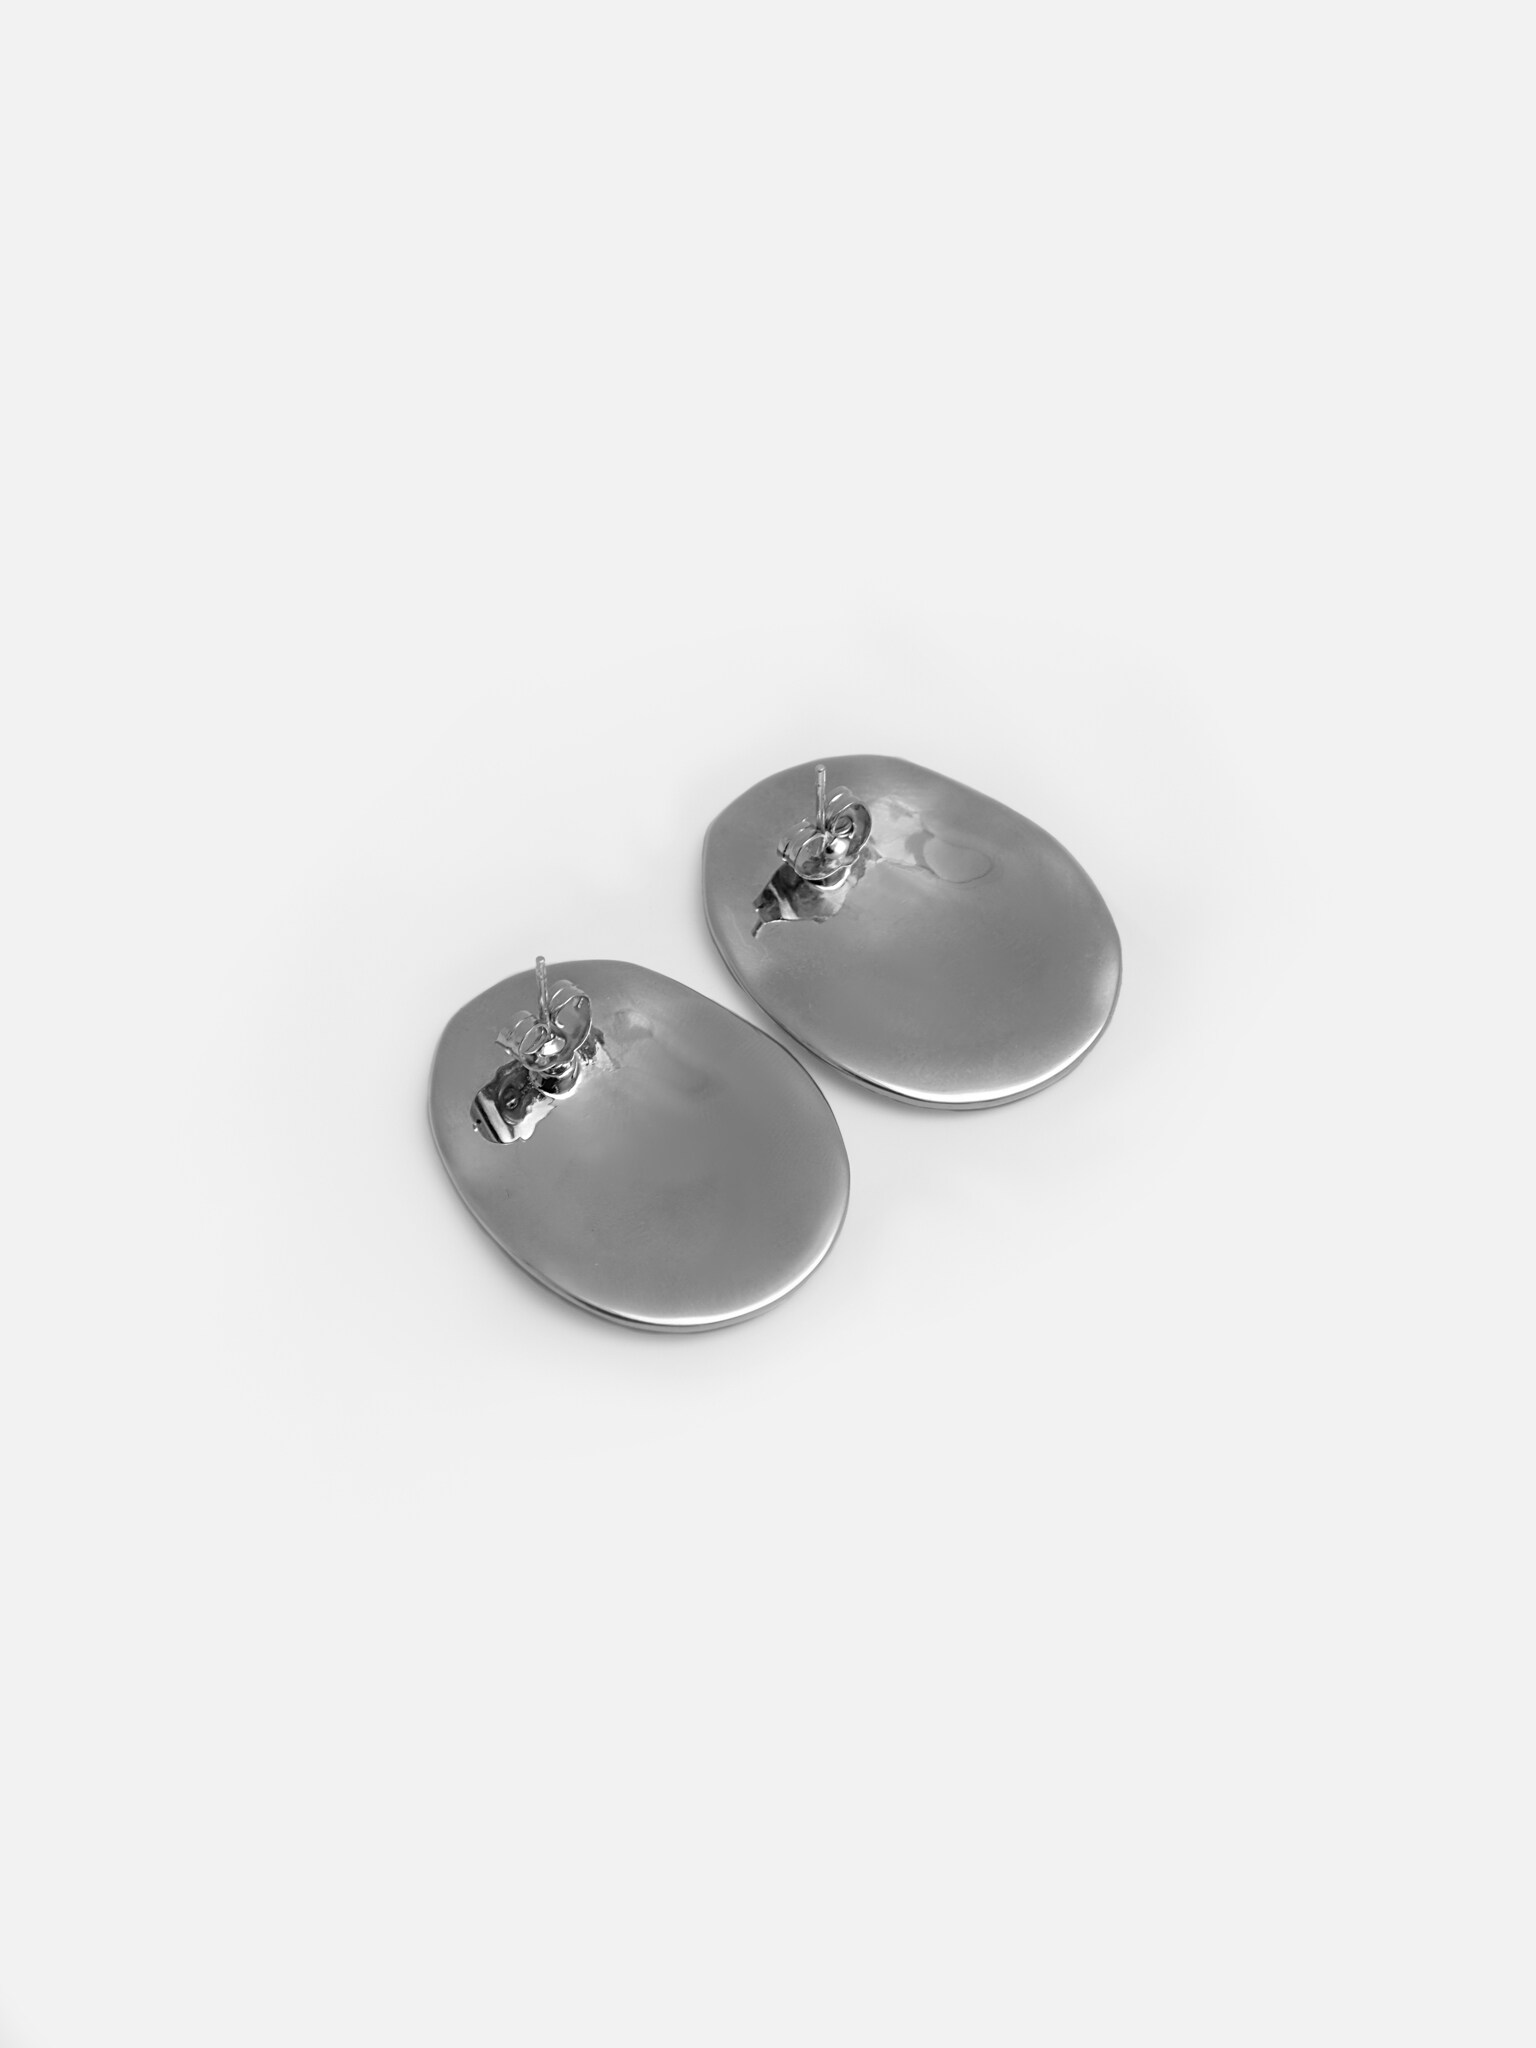 DHRUV COLLECTION Ball Design 925 Pure Sterling-Silver Stud Earrings for  Boys & Girls (5 mm) : Amazon.in: Fashion